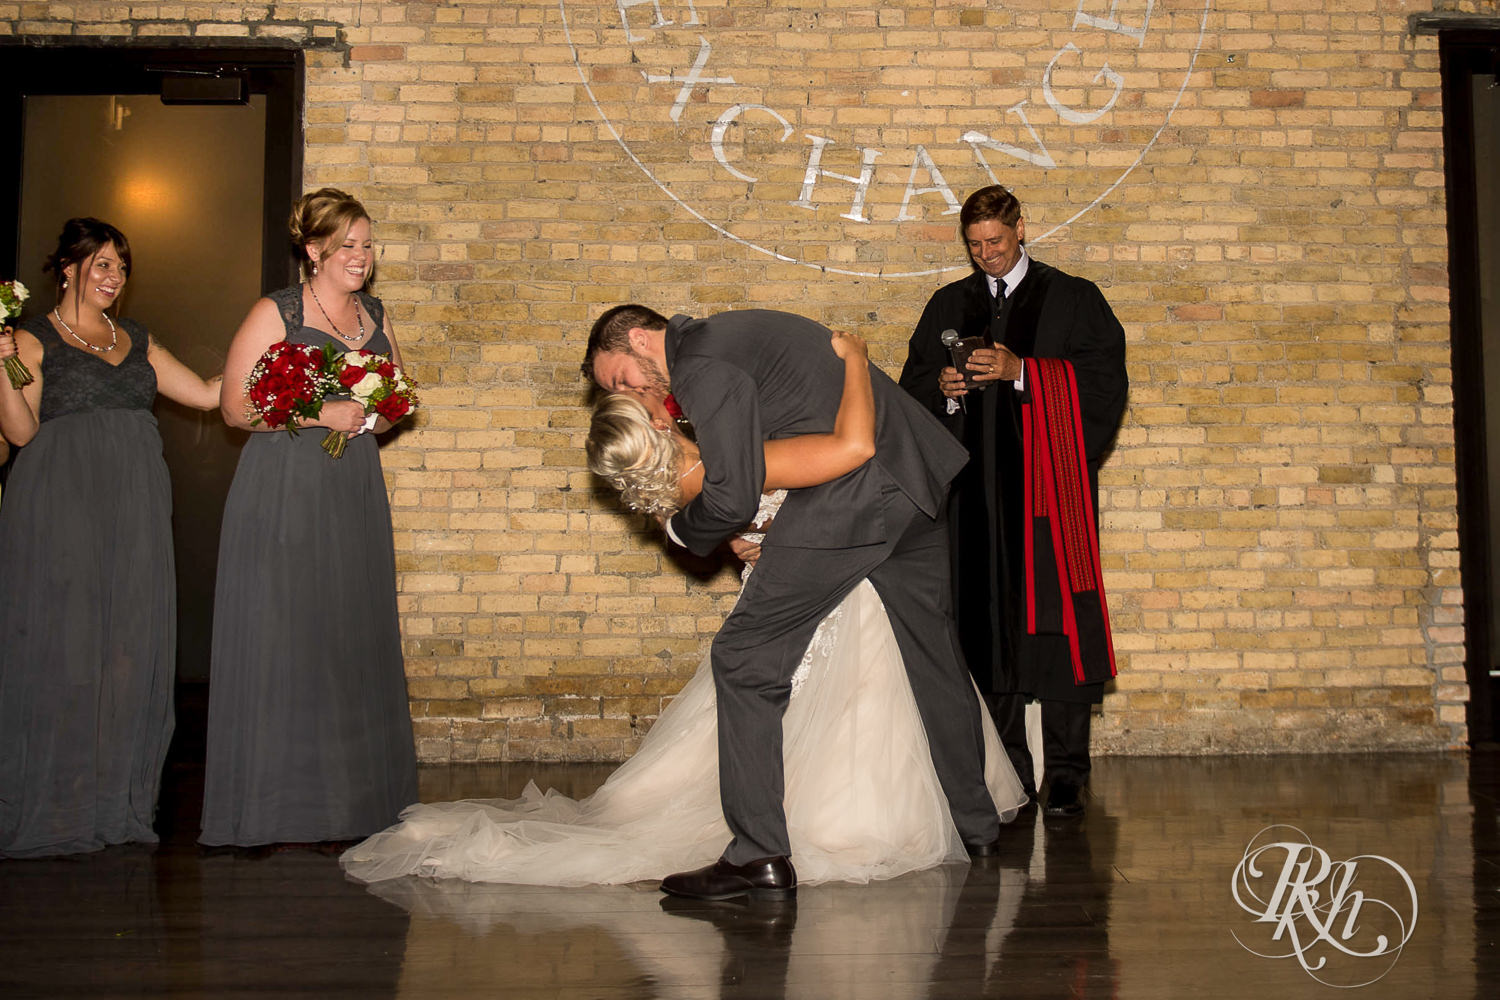 Bride and groom kiss during wedding ceremony at the Lumber Exchange Event Center in Minneapolis, Minnesota.